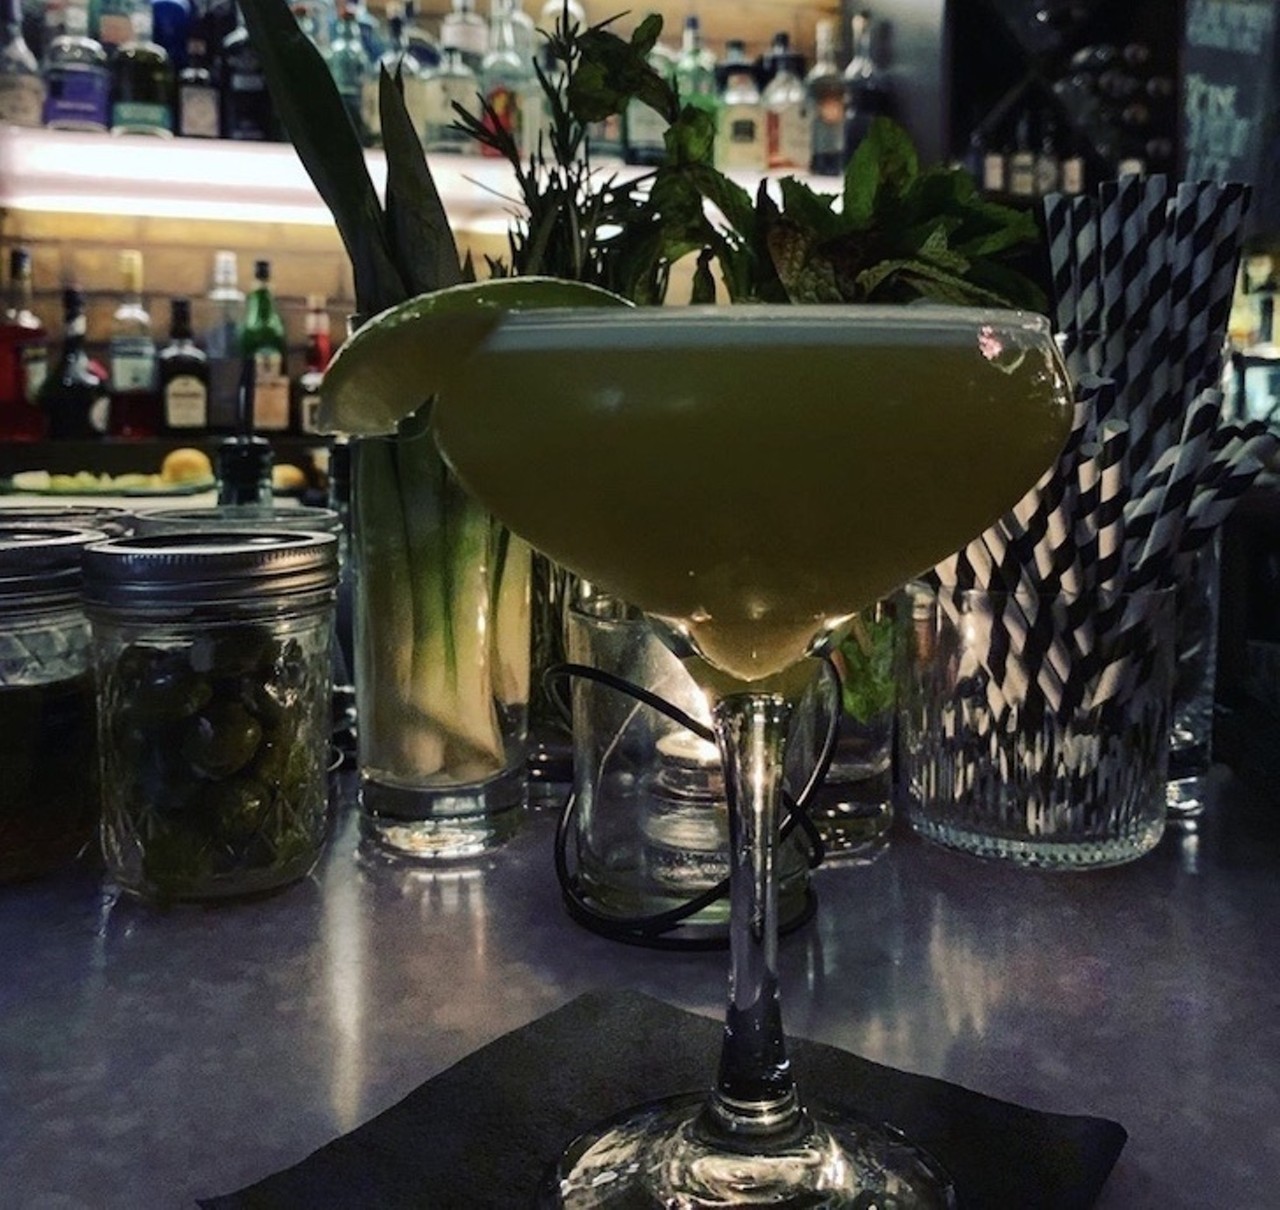 Society Lounge
2063 E. 4th St., Cleveland
Speaking of stepping back in time, the Society Lounge attempts to recreate the party scene of the roaring '20s. The basement bar boasts a &#147;glamorous social scene&#148; and fresh-squeezed juice in their cocktails.
Photo via markdonatelli/Instagram